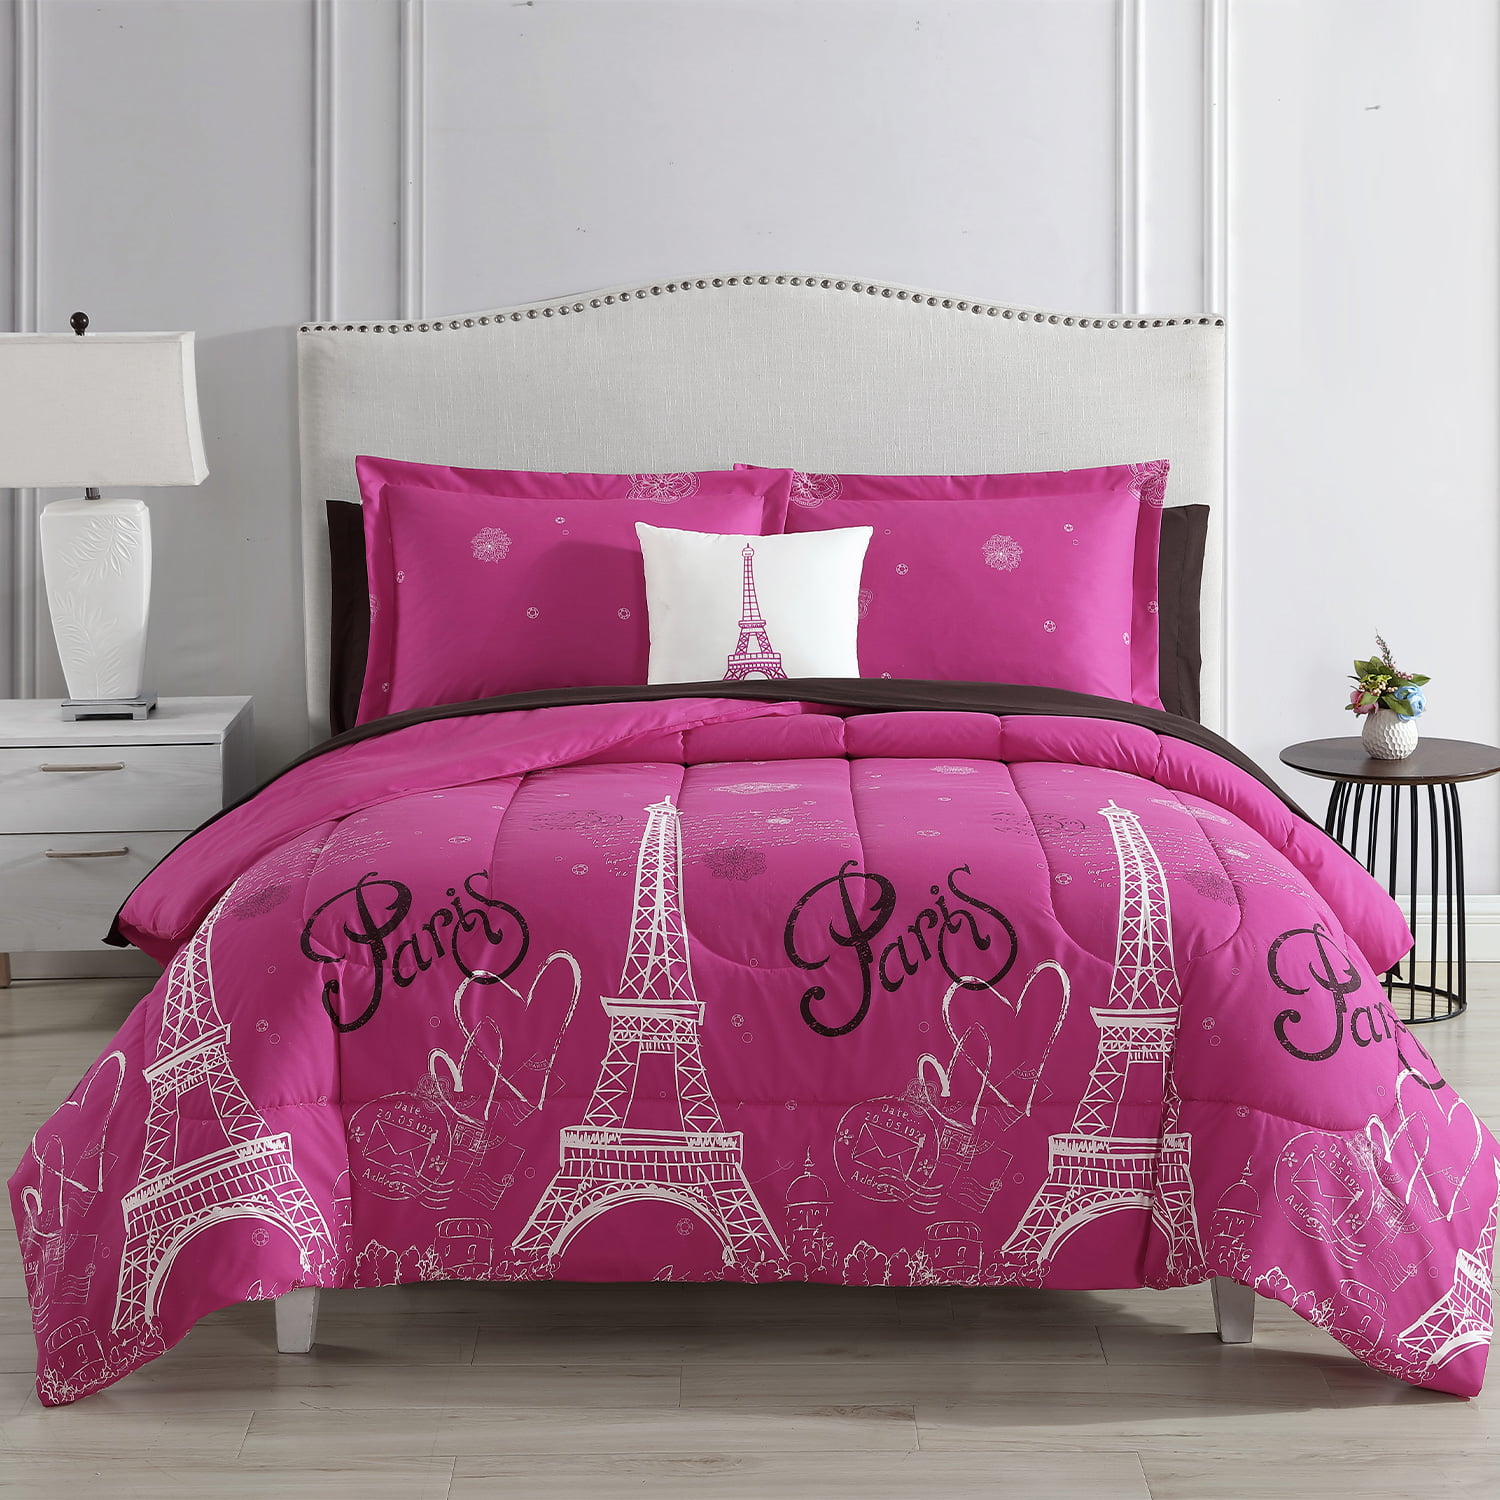 Twin Paris Comforter Pink Black White, Pink Zebra Bed In A Bag Twin